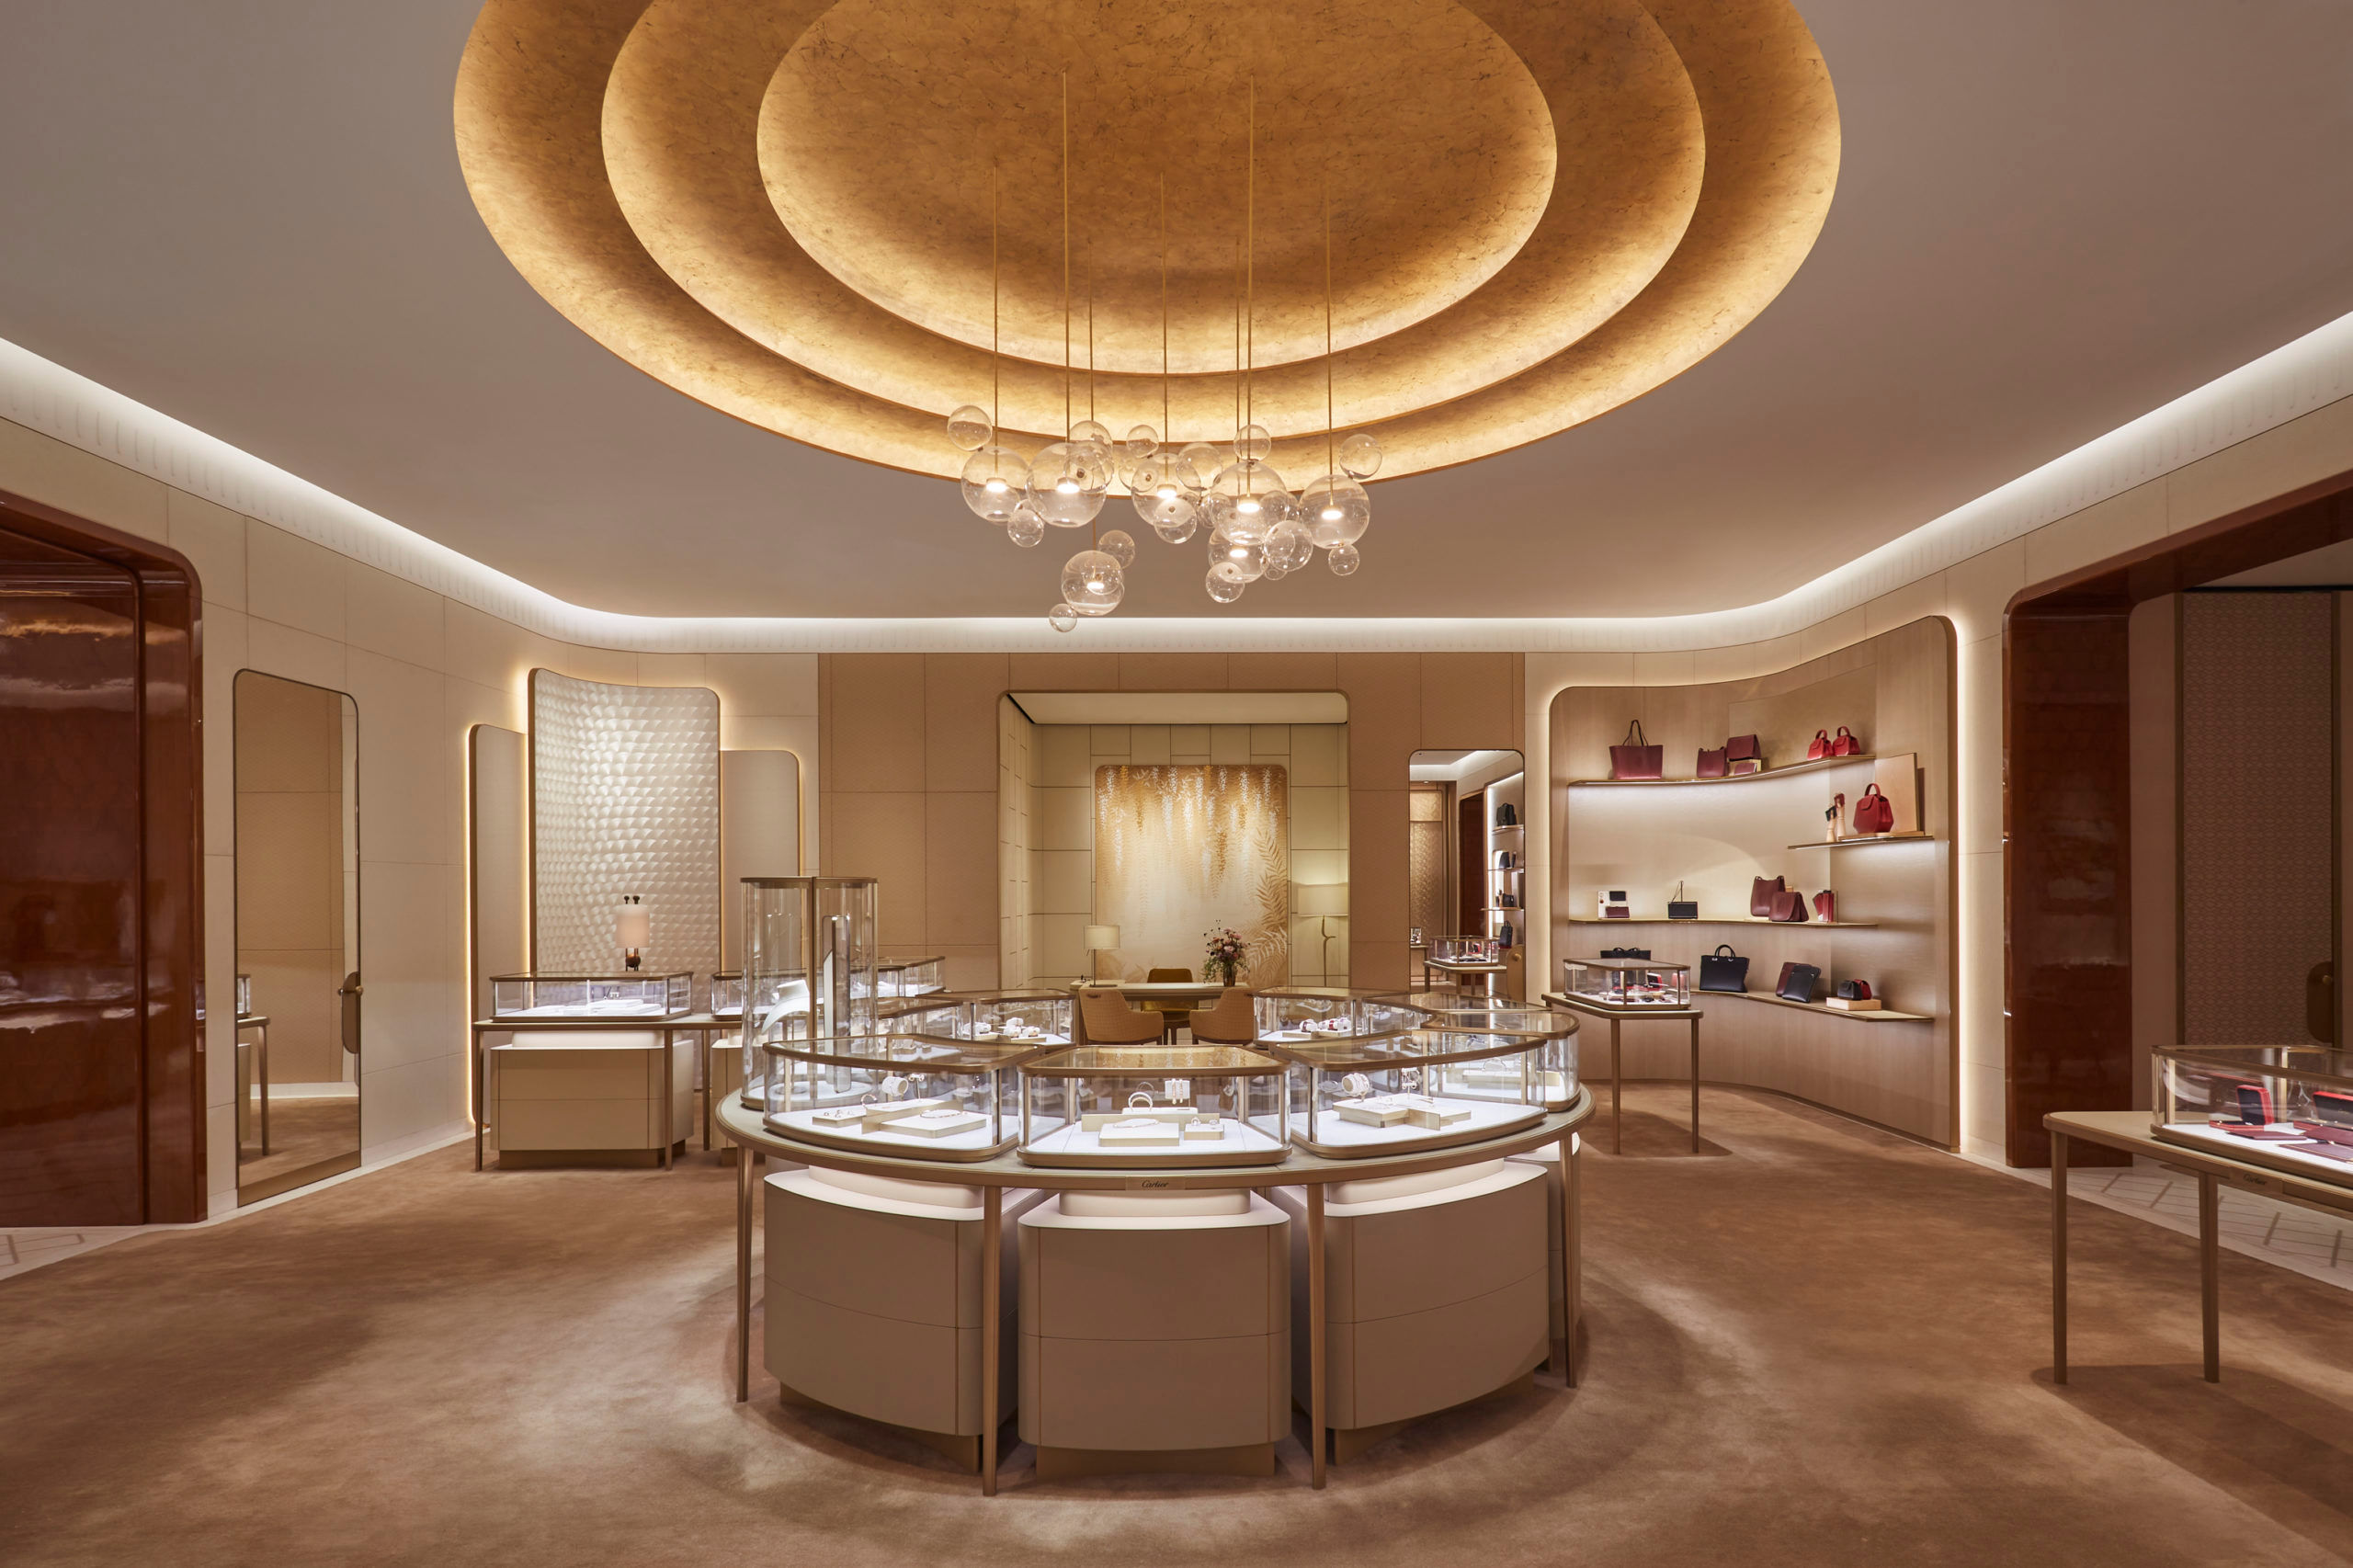 Cartier Siam Paragon Room M47-49, Siam Paragon, Pathumwan: fine jewelry,  watches, accessories at 991 Rama I Road - Cartier